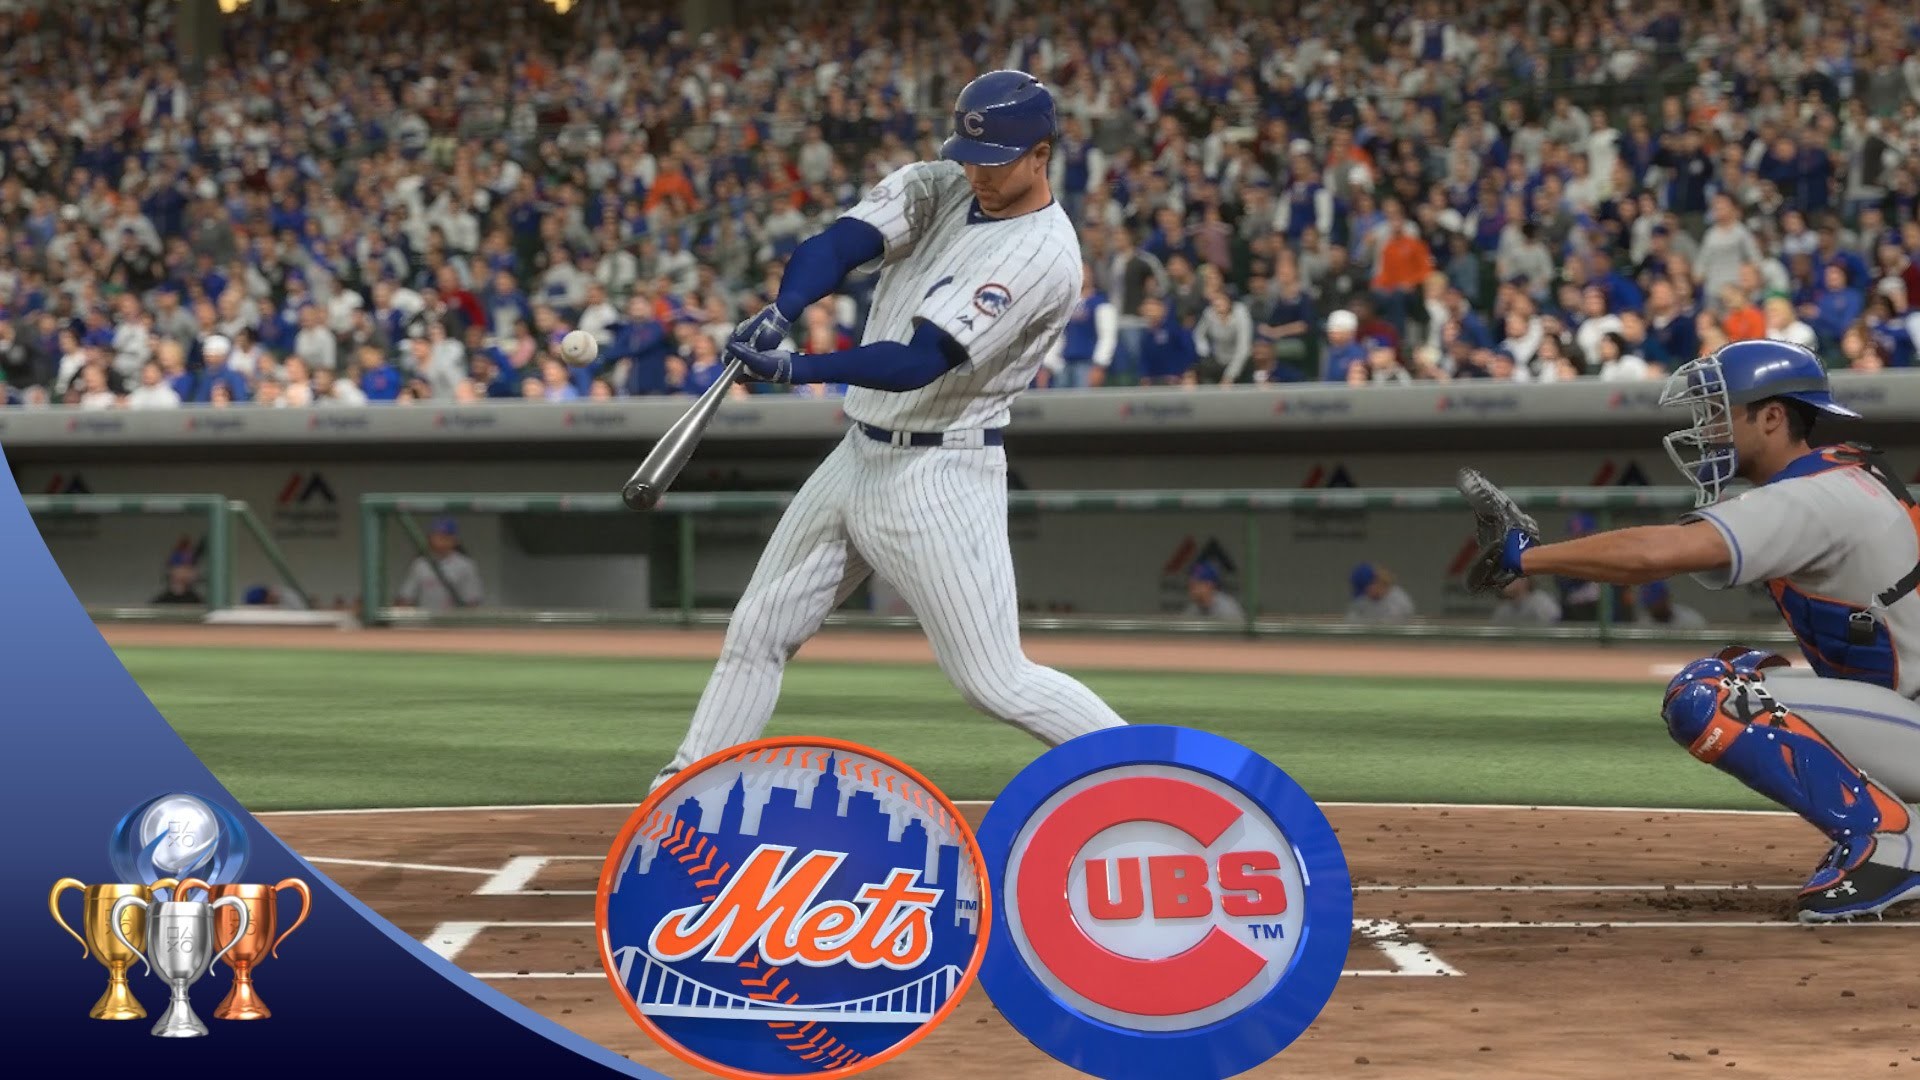 1920x1080 MLB The Show 16 - Mets vs Cubs (Full Game, Broadcast Presentation) - YouTube